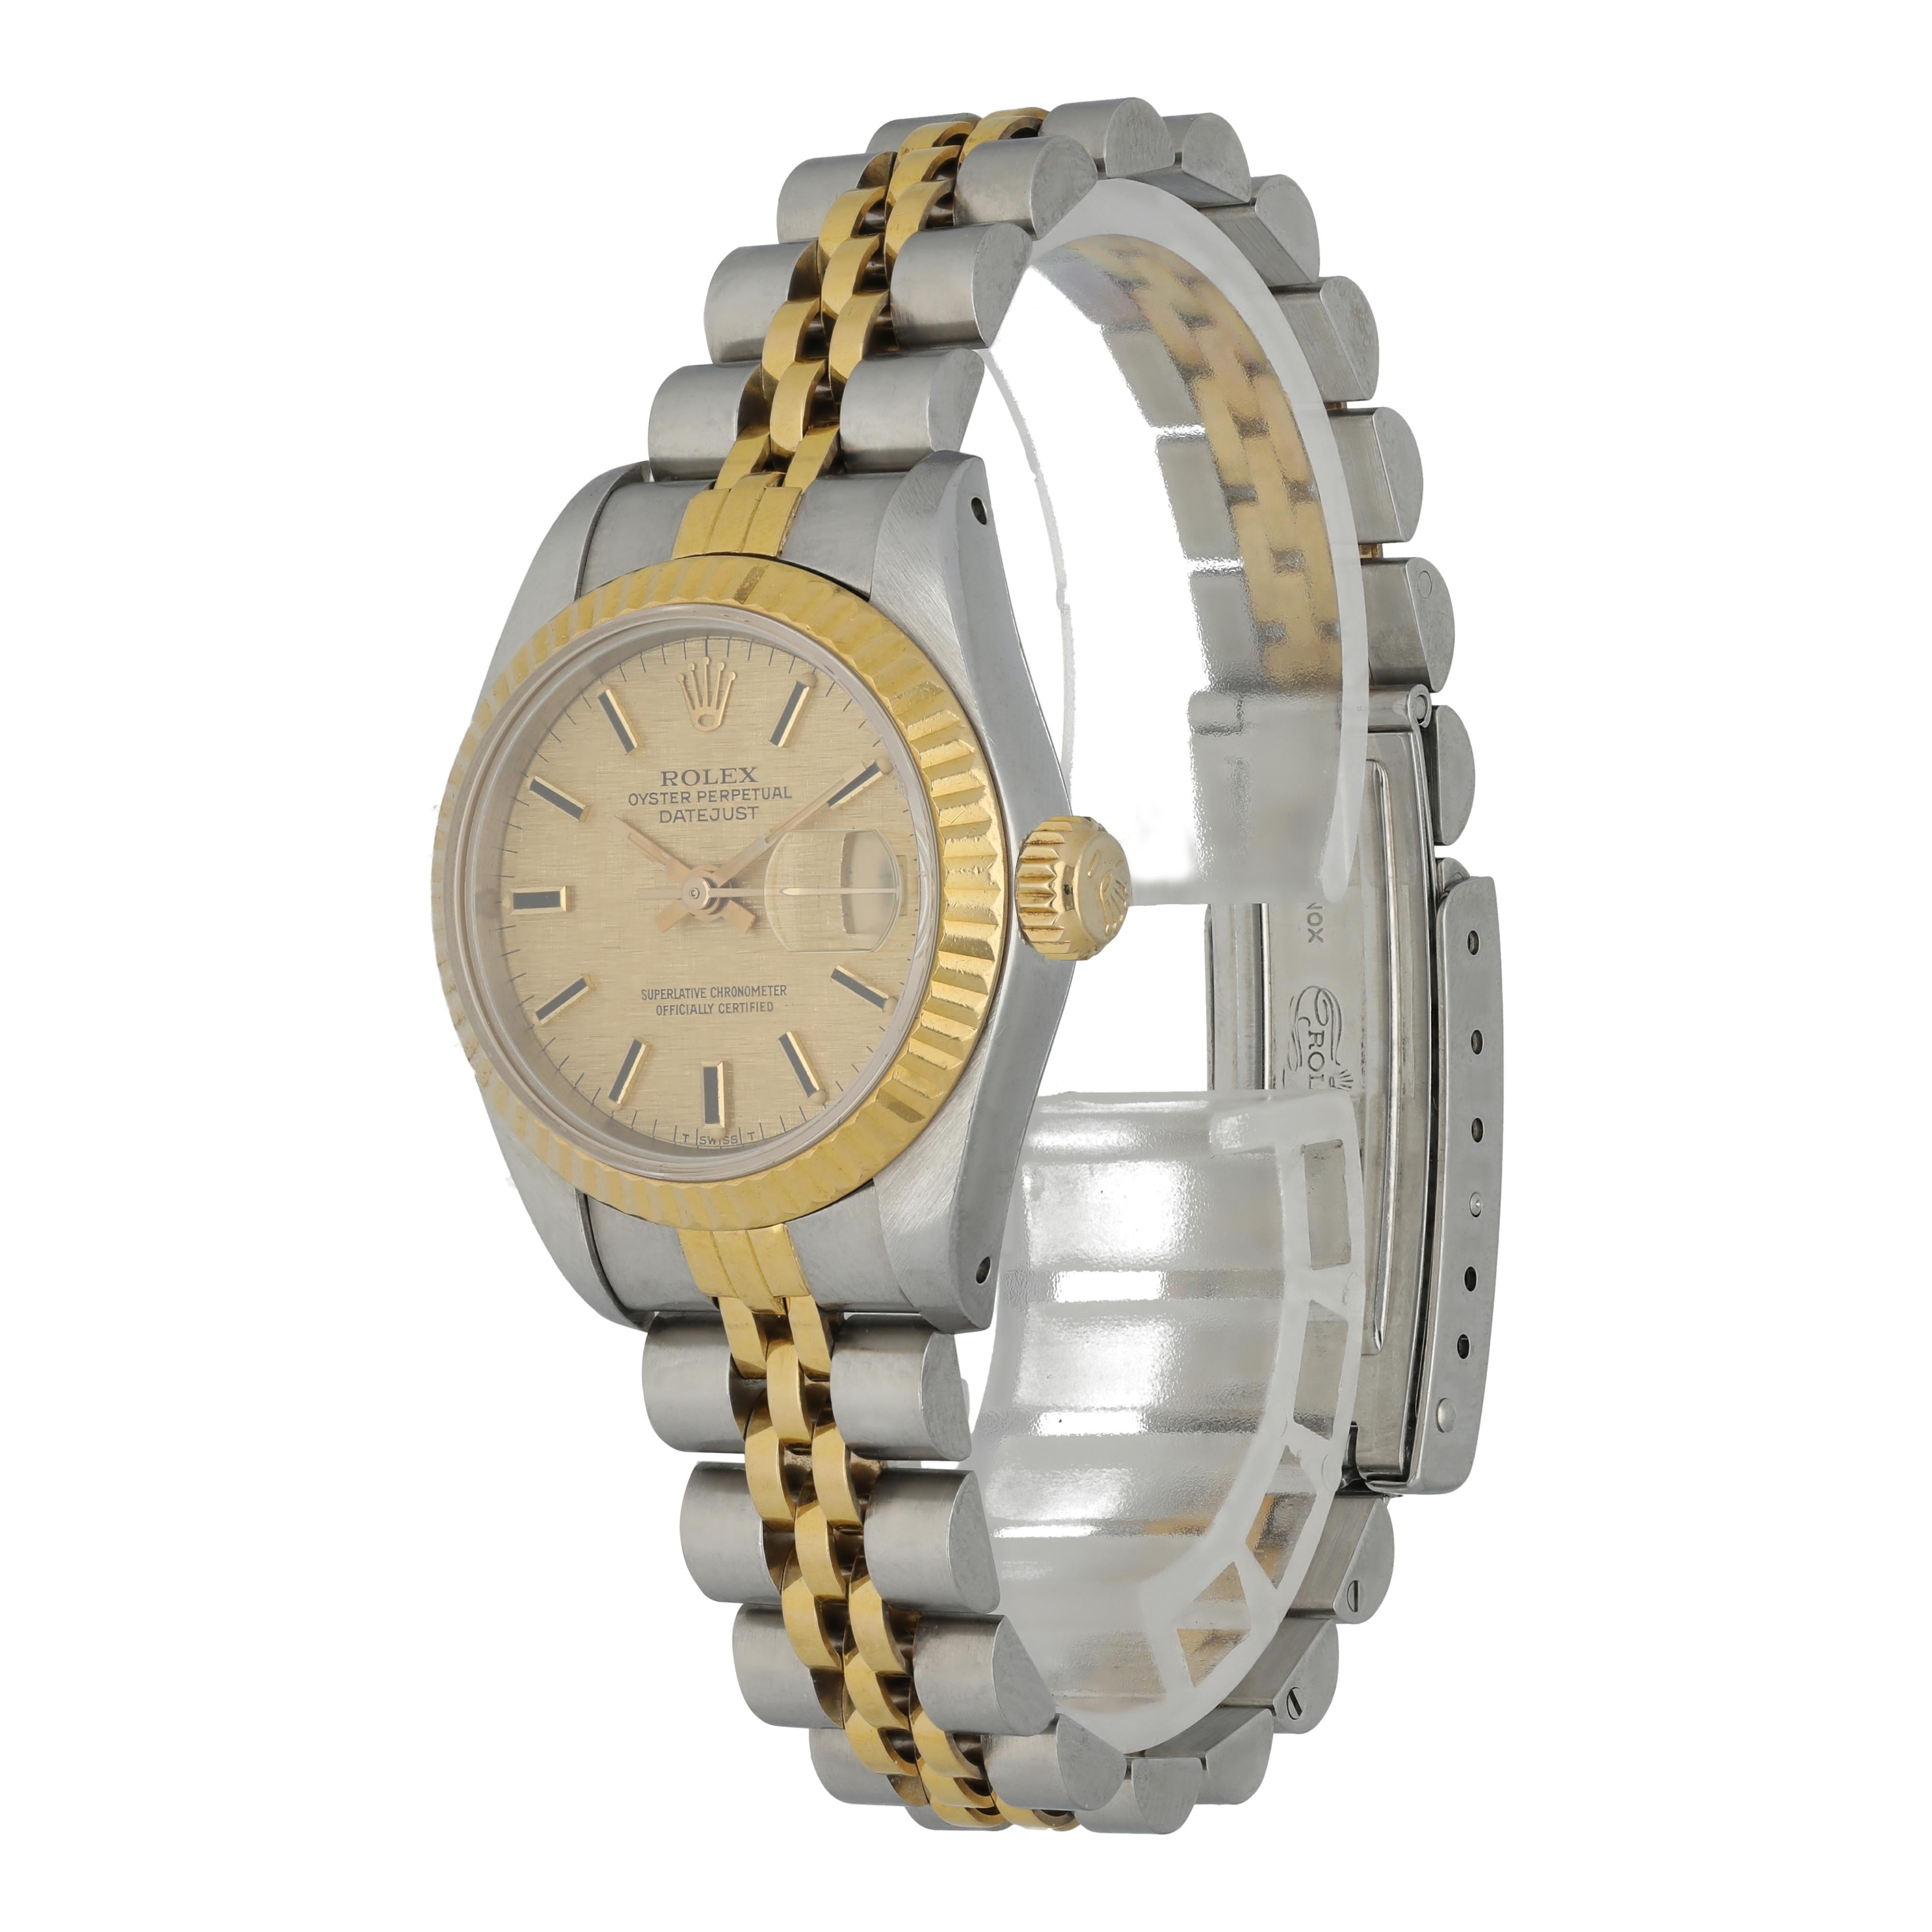 Rolex Datejust 69173 Ladies Watch. 
26mm Stainless Steel case. 
Yellow Gold Fluted Bezel. 
Champagne linen dial with gold hands and index hour markers. 
Minute markers on the outer dial. 
Date display at the 3 o'clock position. 
Stainless Steel &